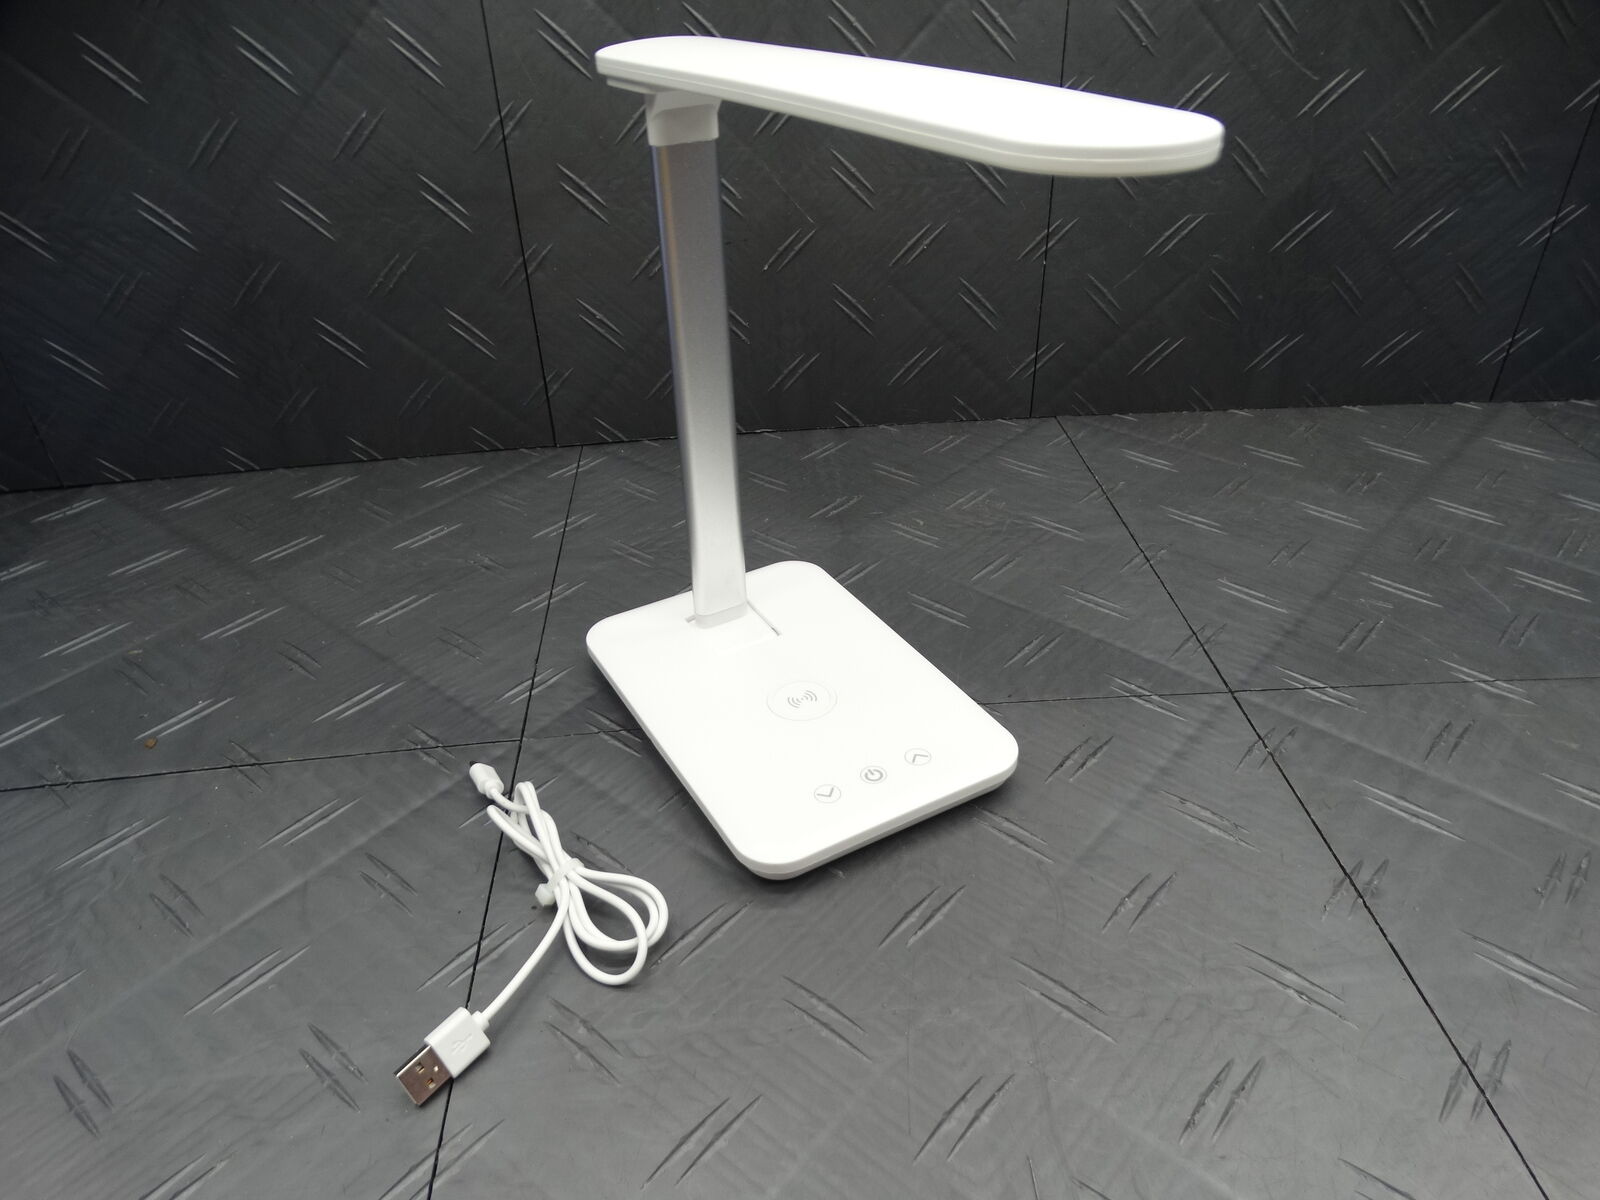 Tzumi 12.6 in. White Desk Lamp Atmosphere with Wireless Charging 5W White